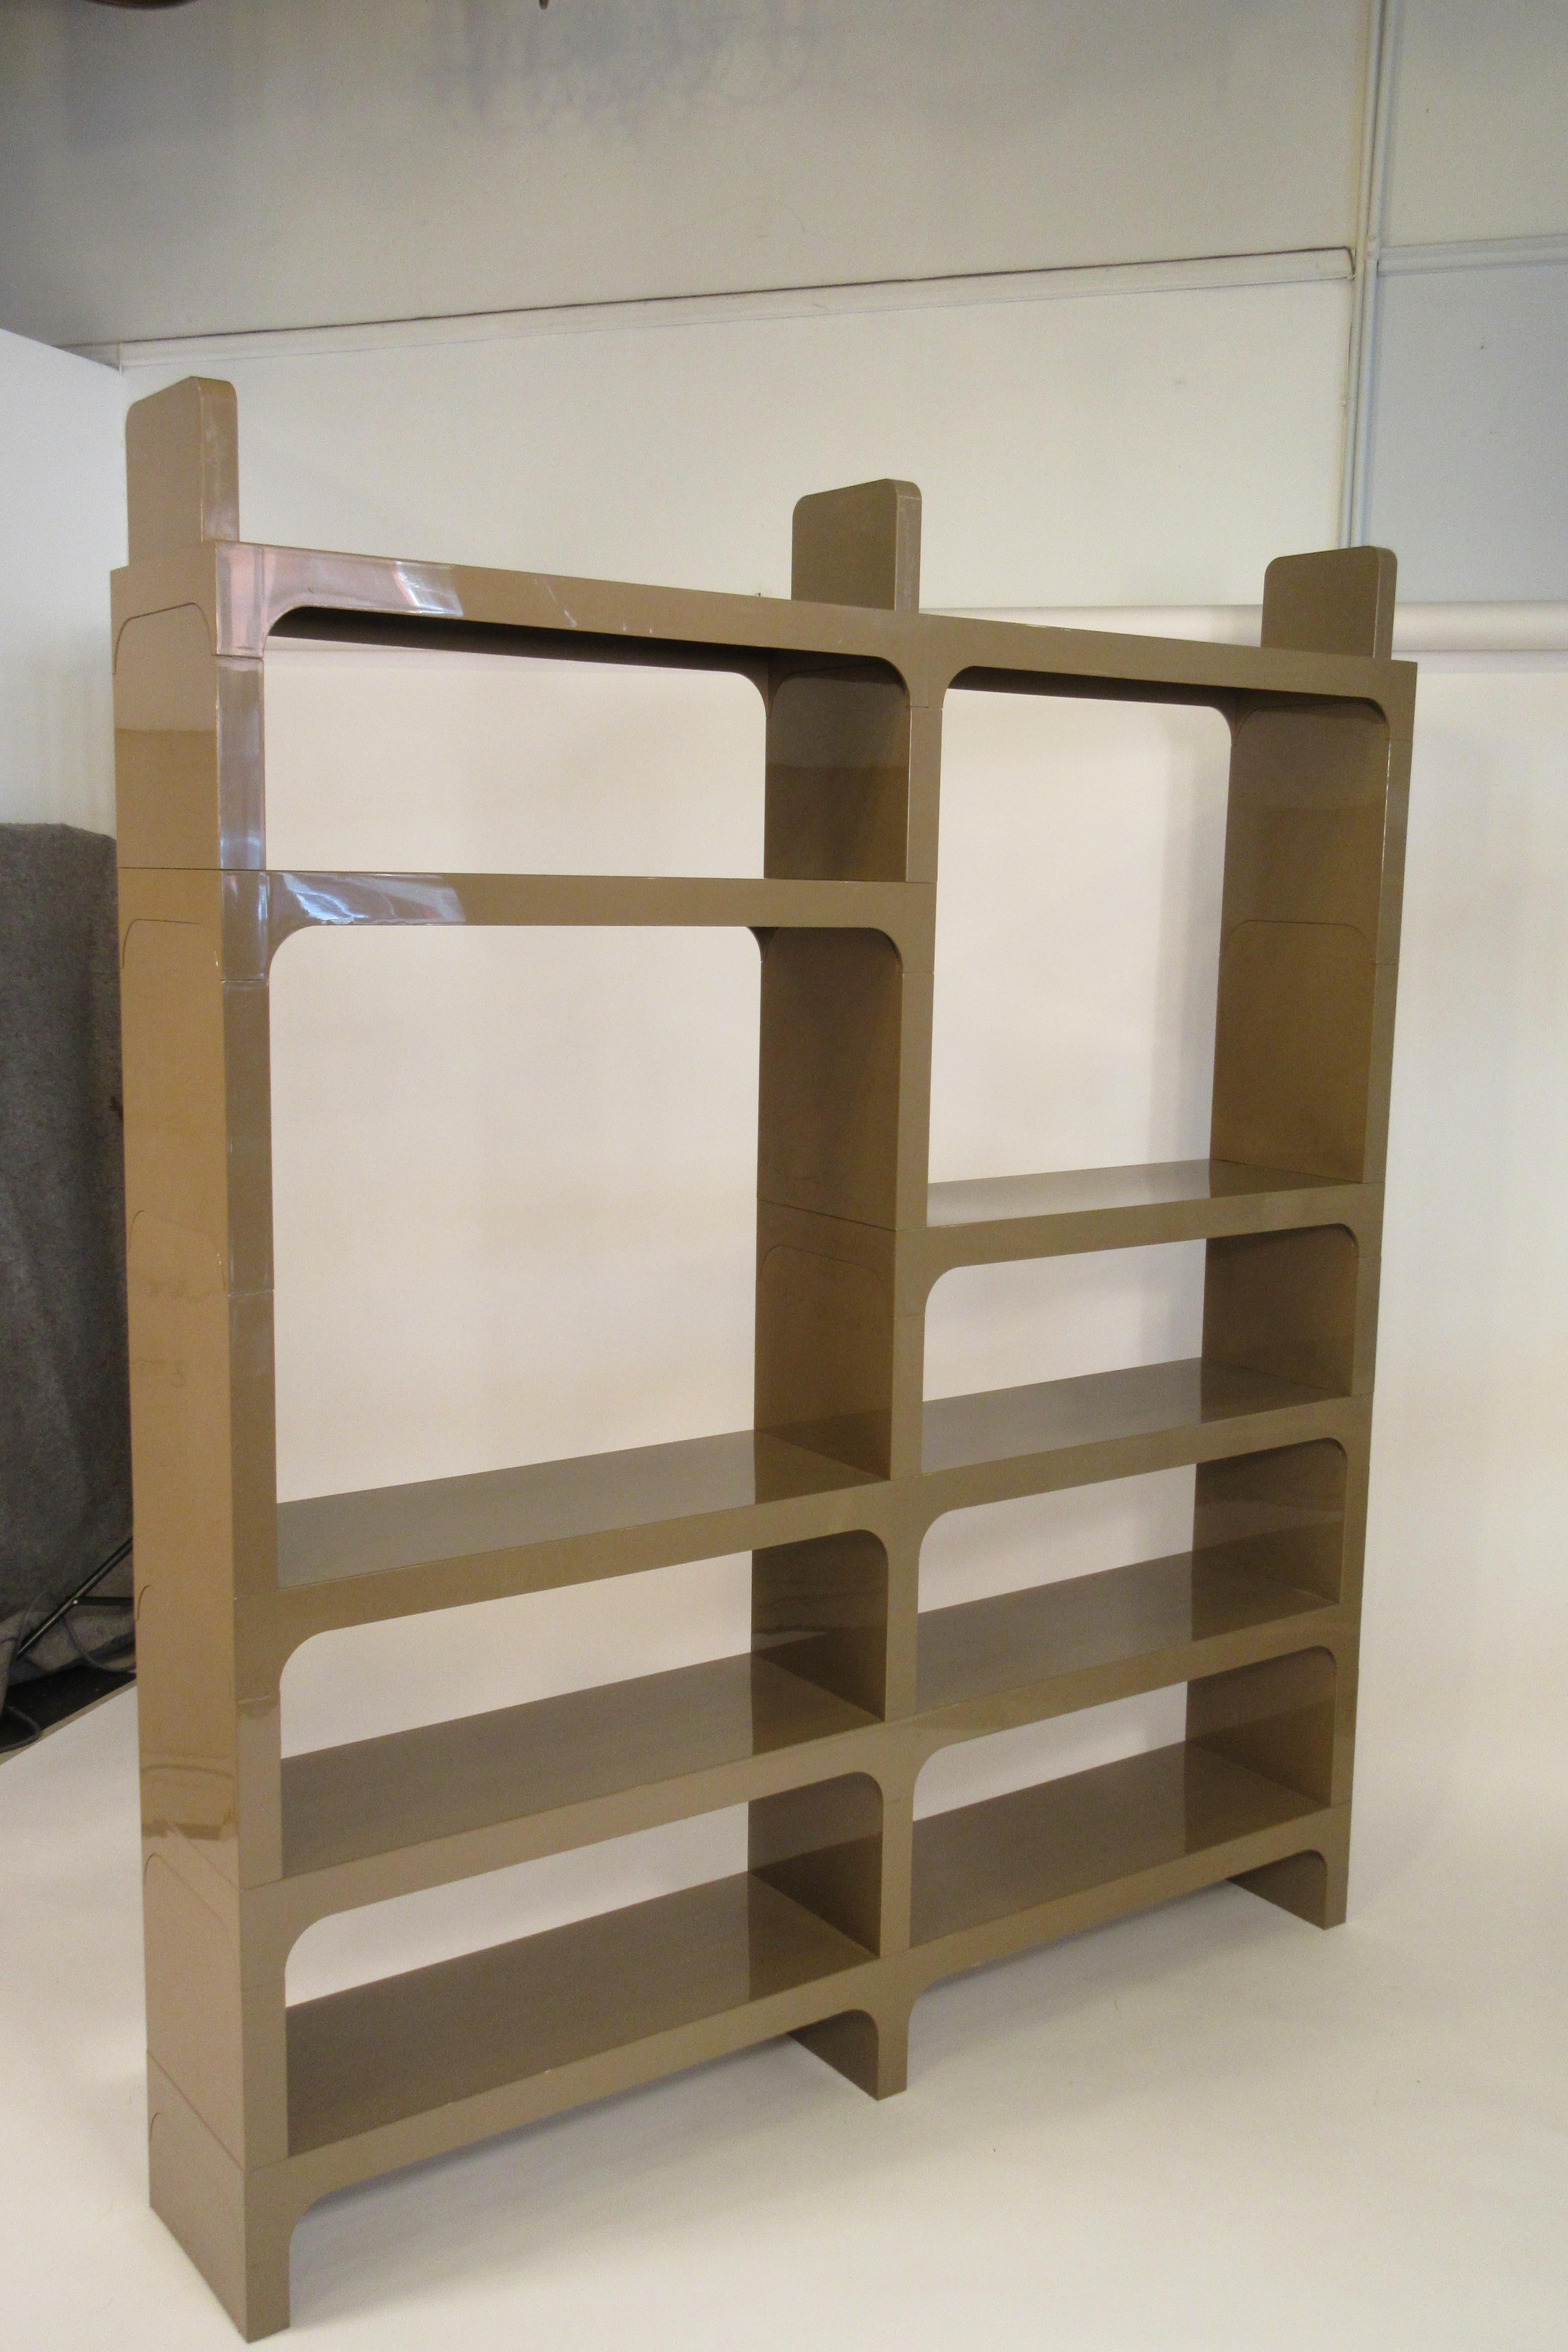 1970s bookcase by Olaf von Bohr for Kartell.